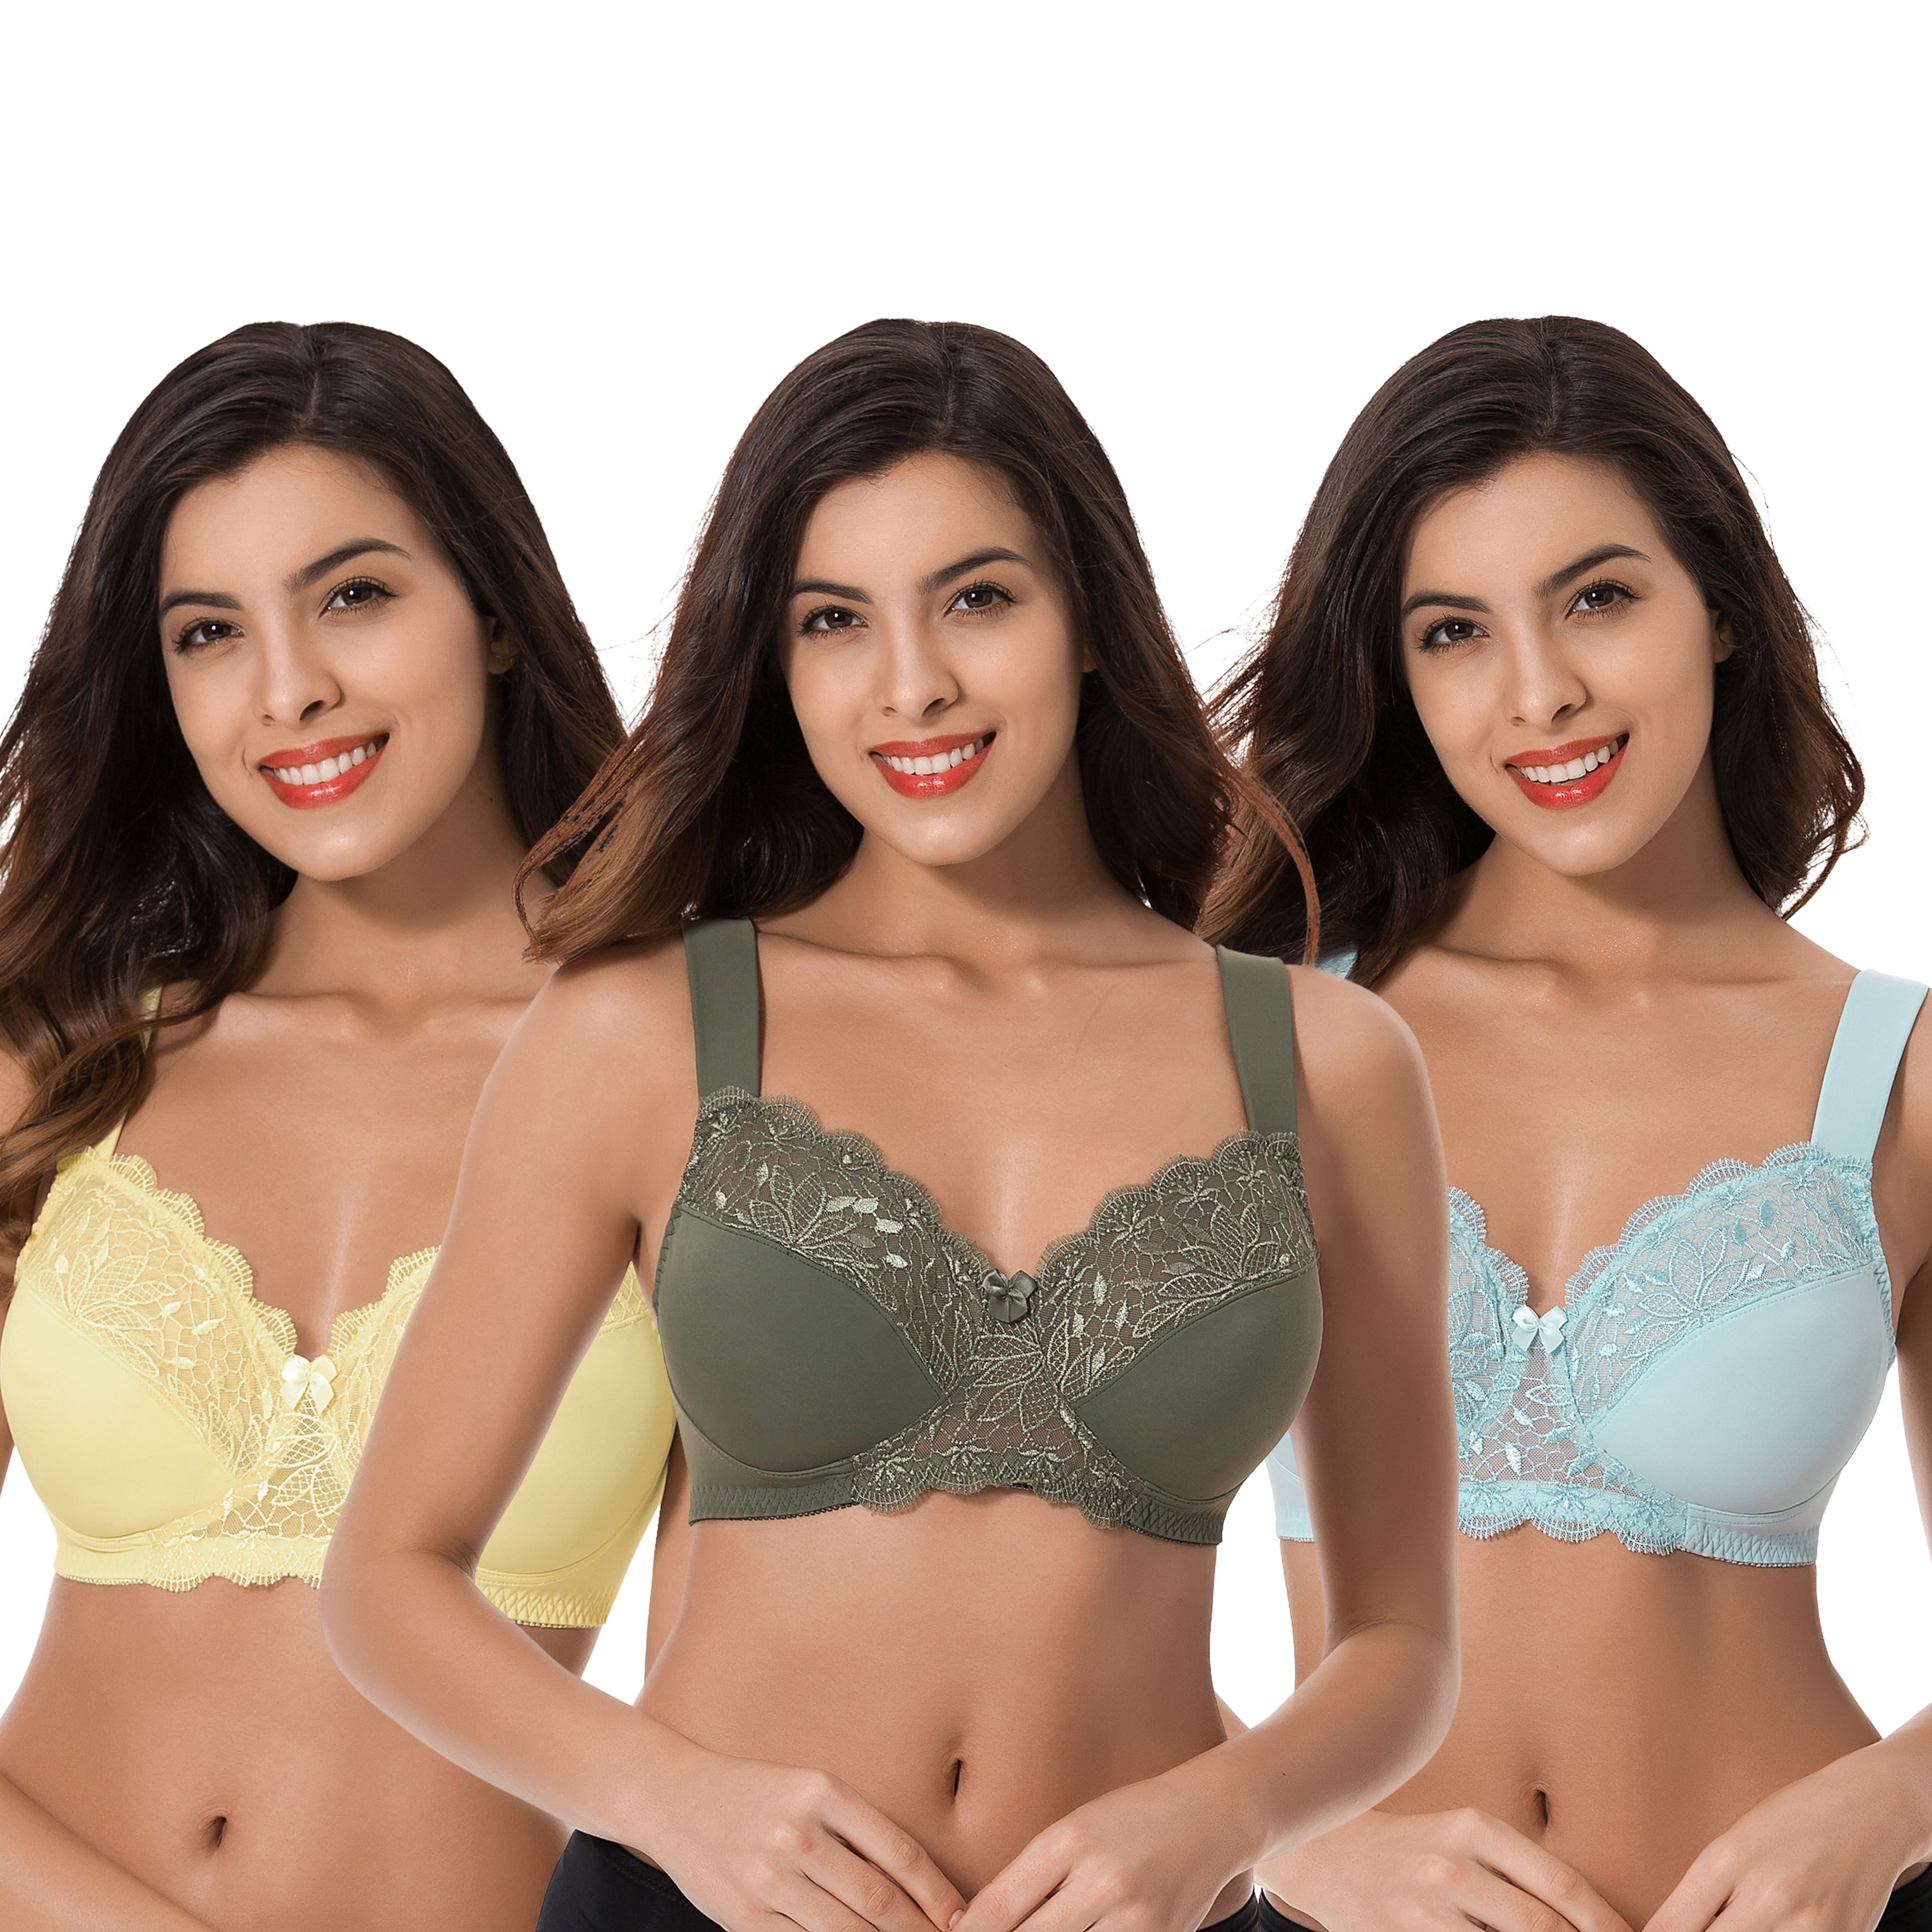 Curve Muse Plus Size Minimizer Underwire Unlined Bras with Embroidery Lace-3Pack 